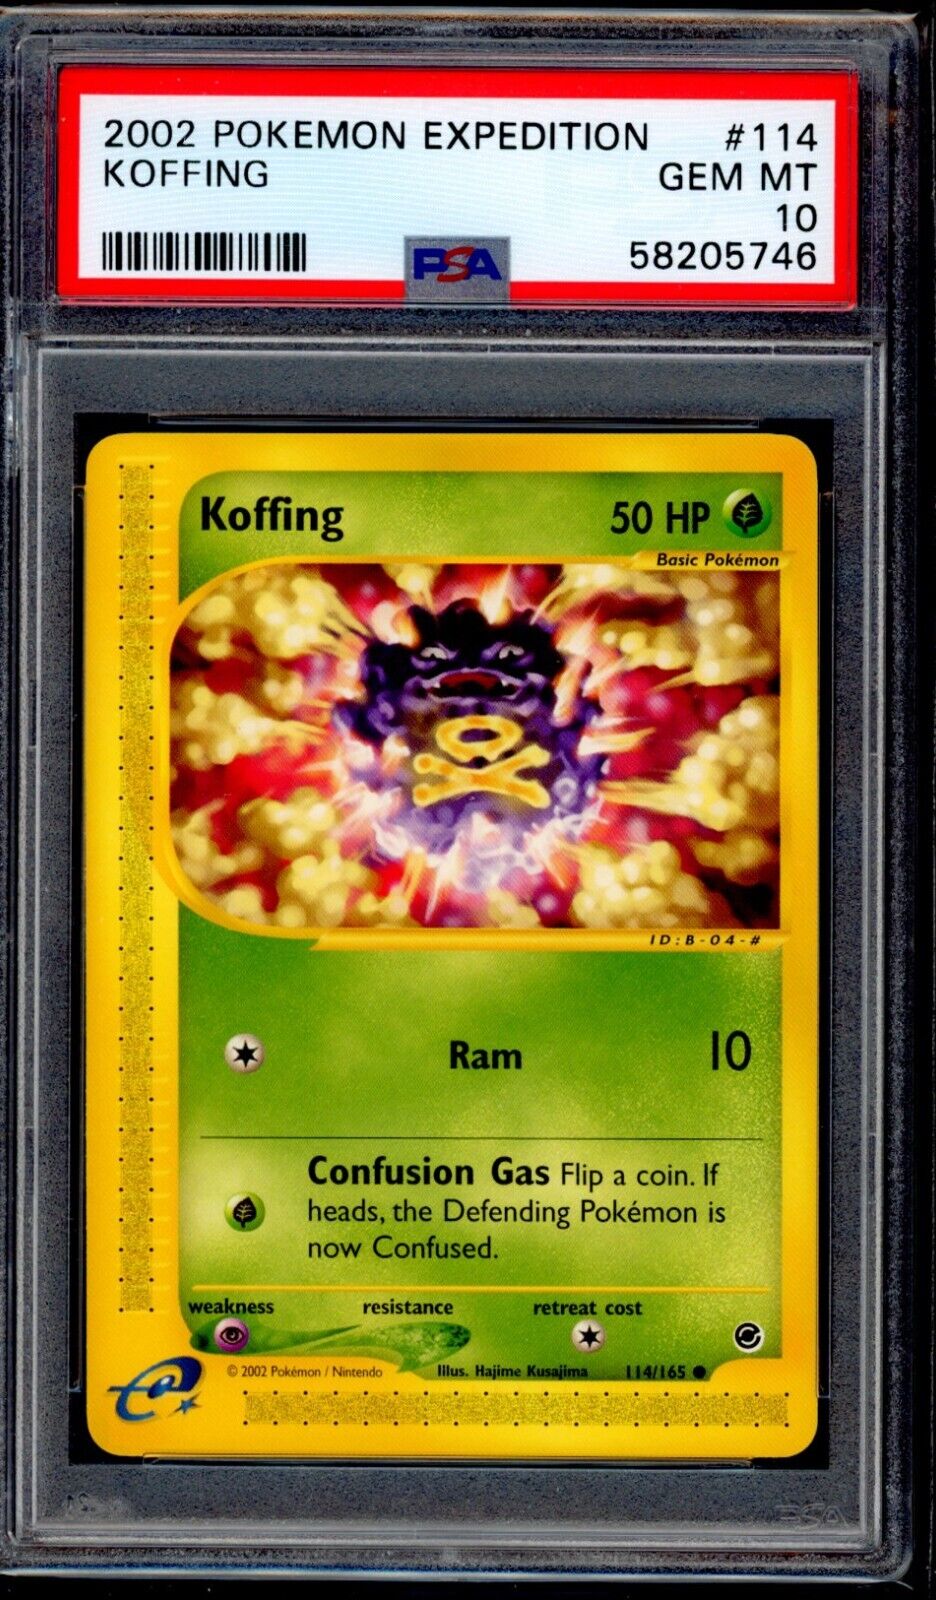 PSA 10 Koffing 2002 Pokemon Card 114/165 Expedition